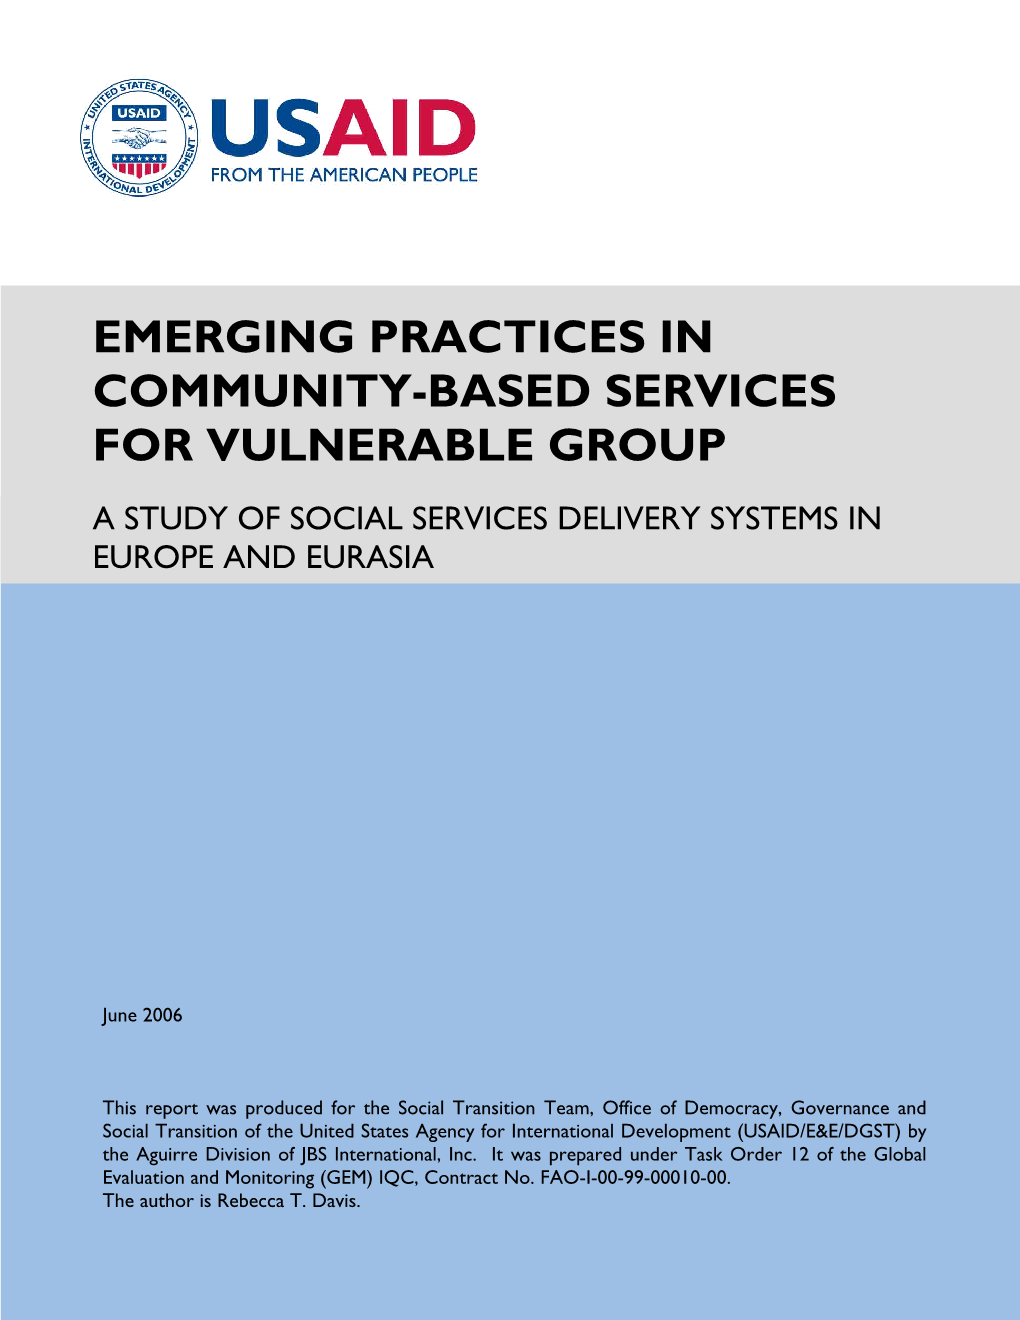 Emerging Practices in Community-Based Services for Vulnerable Group